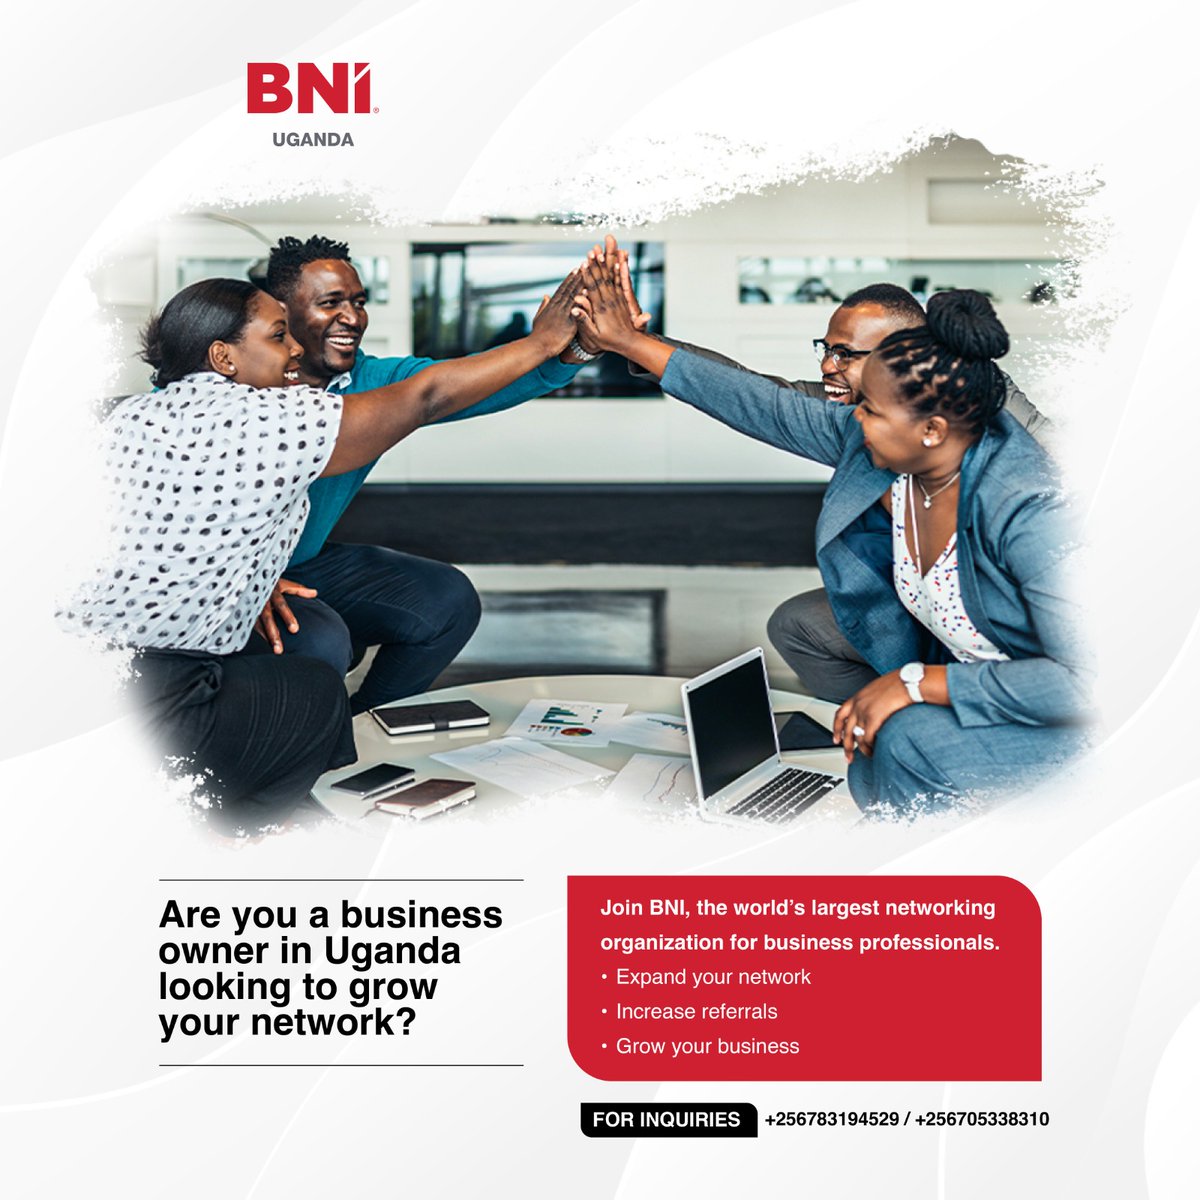 If you are a Ugandan entrepreneur looking to expand your network, generate quality referrals, and grow your business exponentially, BNI (Business Network International) is here to empower you. #BNI #Networking #breakthrough2024